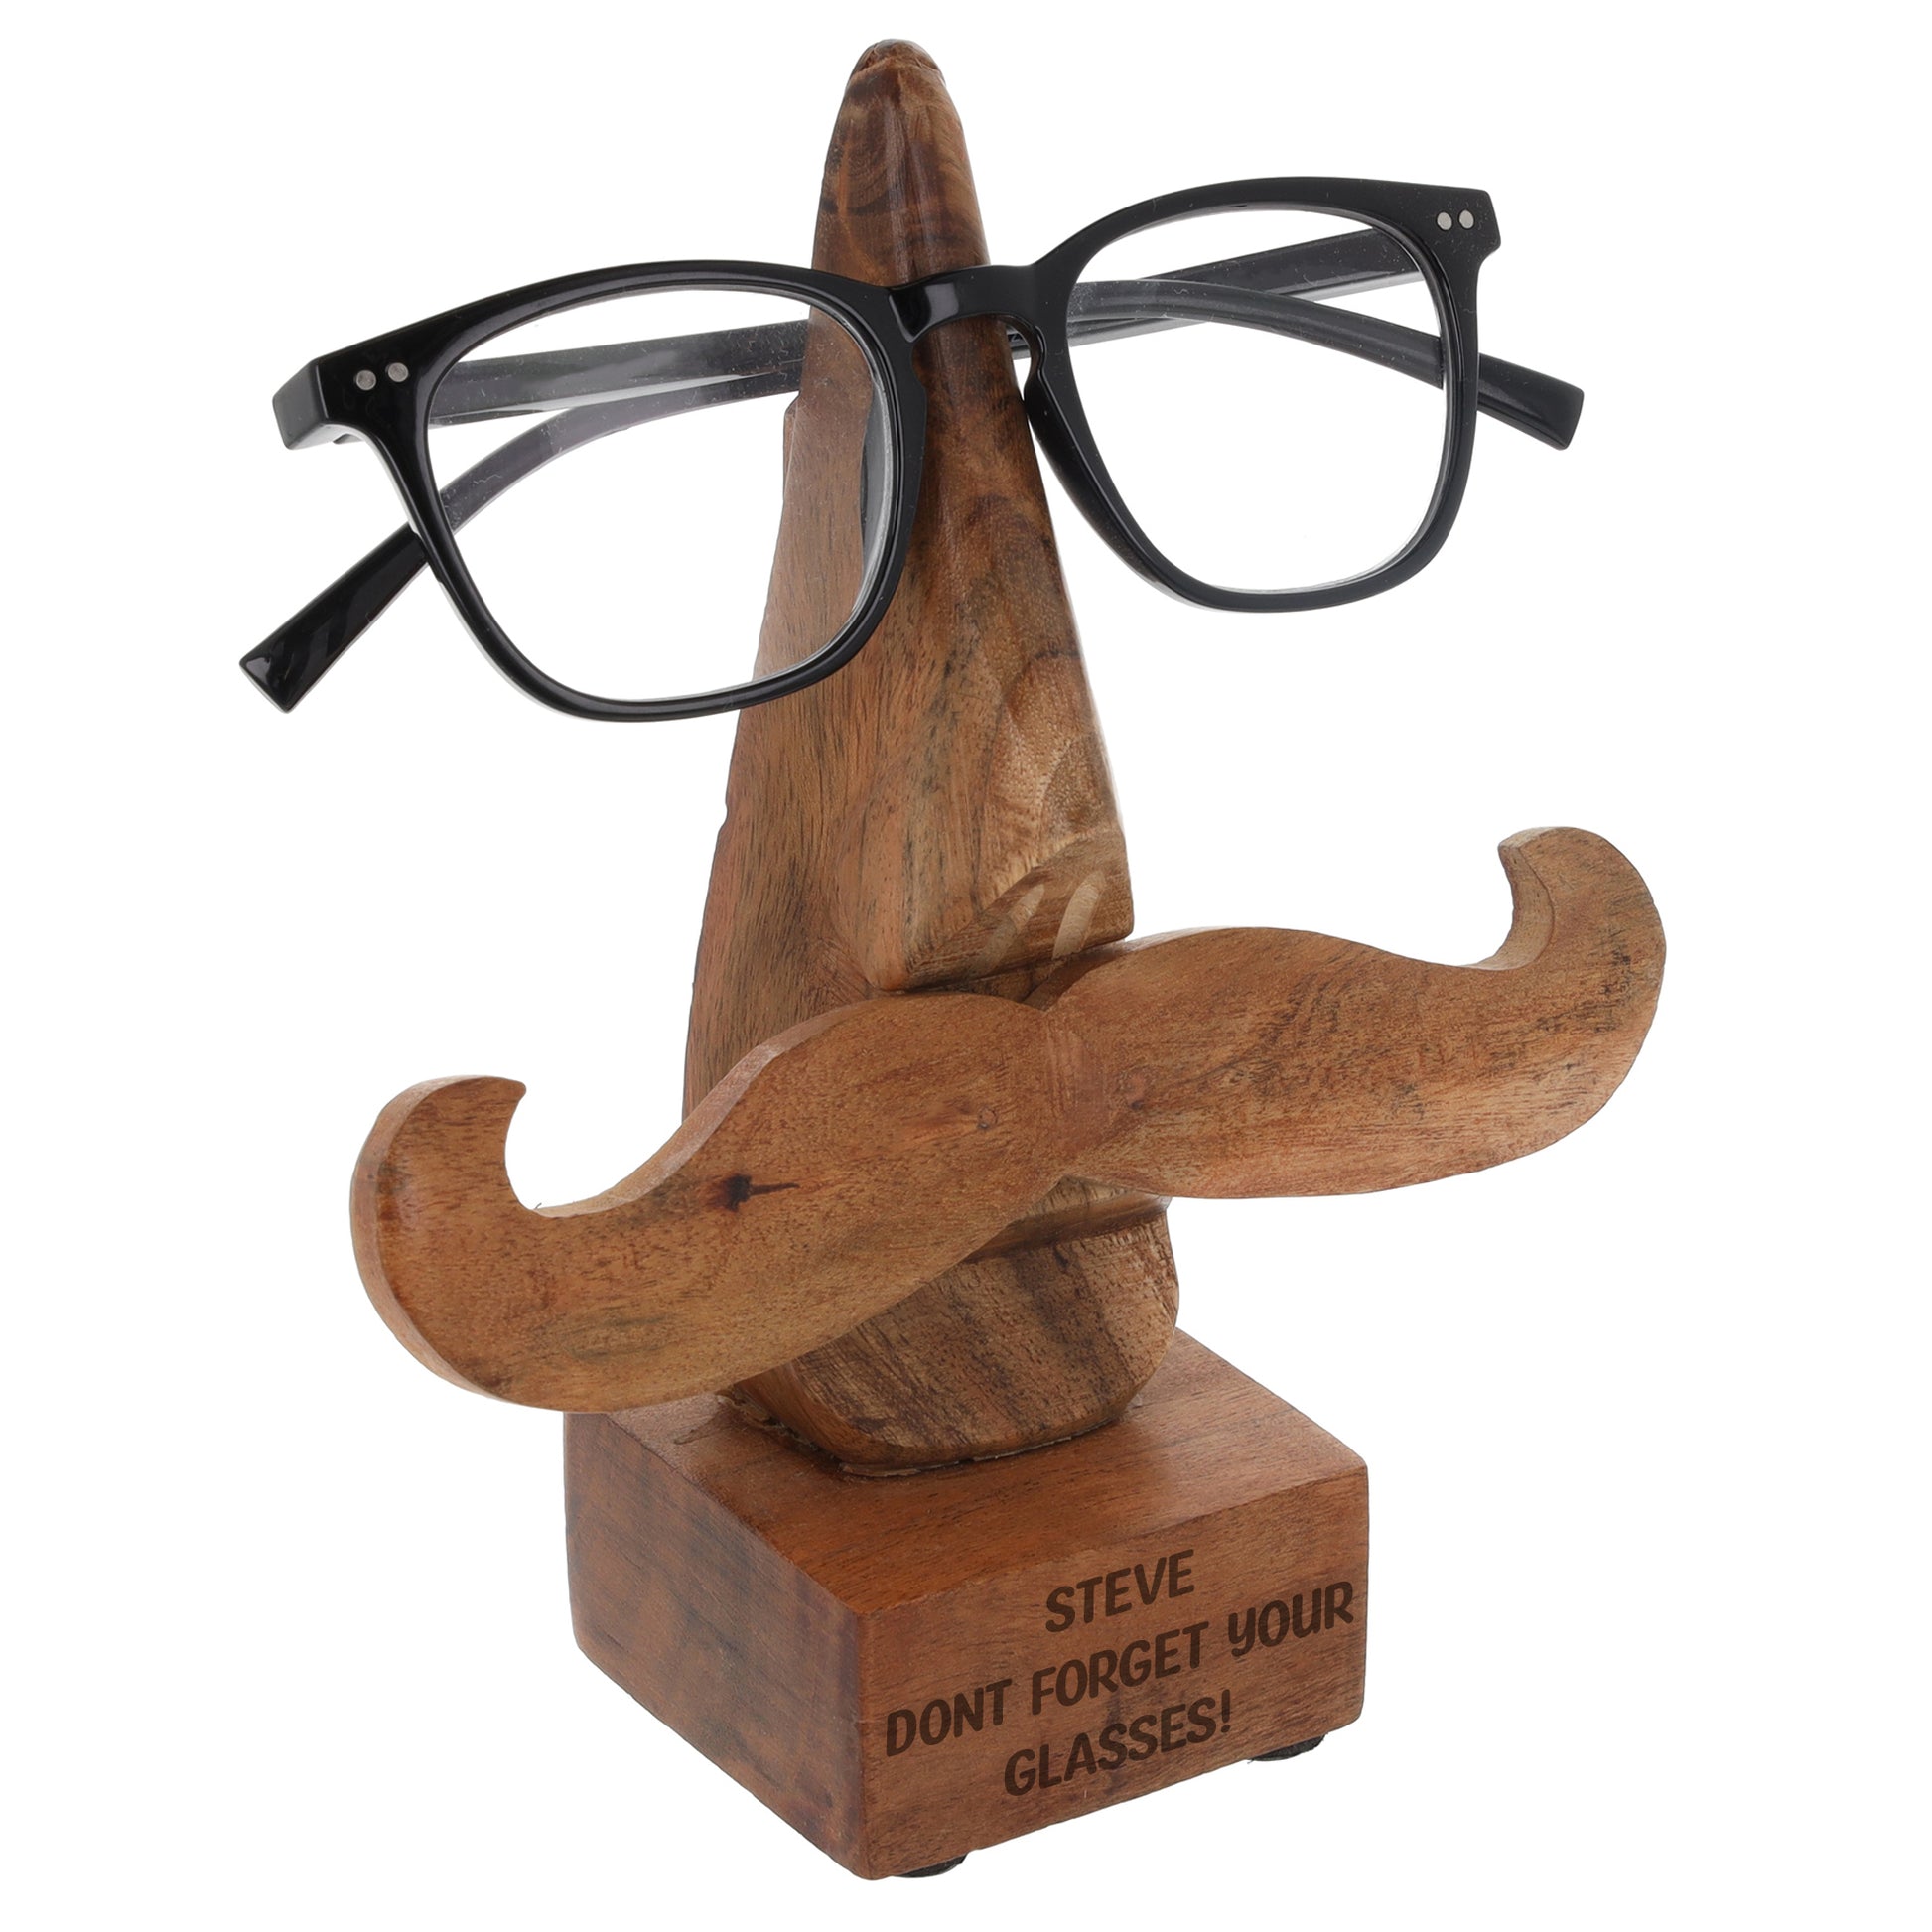 Personalised Engraved Wooden Face Glasses Holder  - Always Looking Good -   